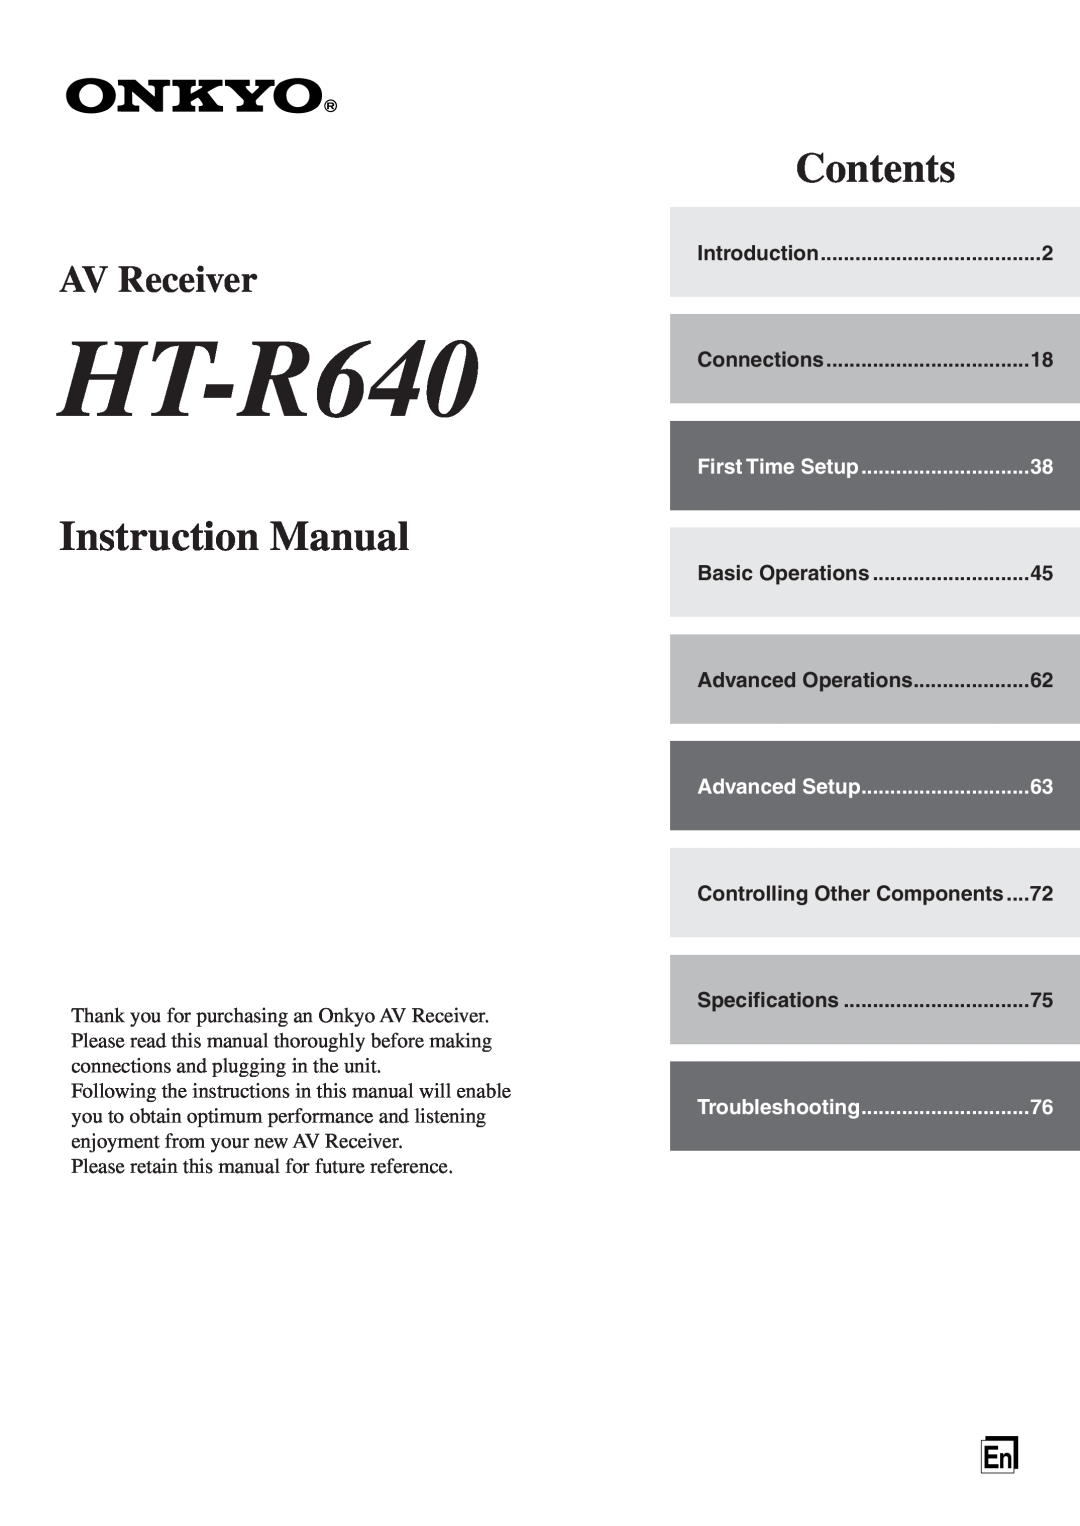 Onkyo HT-R640 instruction manual Controlling Other Components, Instruction Manual, Contents, AV Receiver 